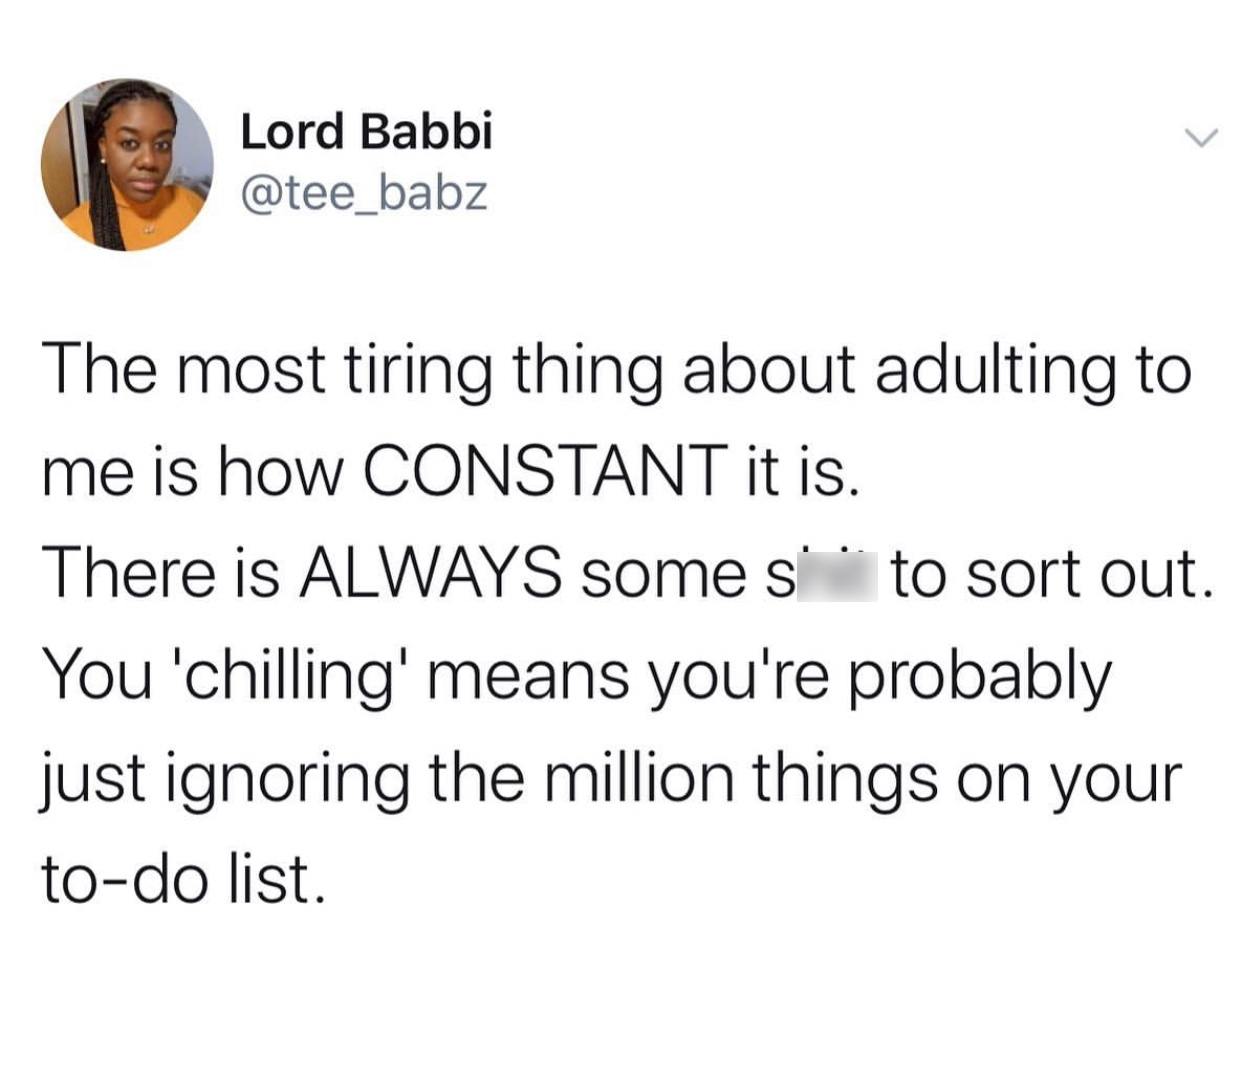 no homo bruh memes - Lord Babbi The most tiring thing about adulting to me is how Constant it is. There is Always some s to sort out. You 'chilling' means you're probably just ignoring the million things on your todo list.